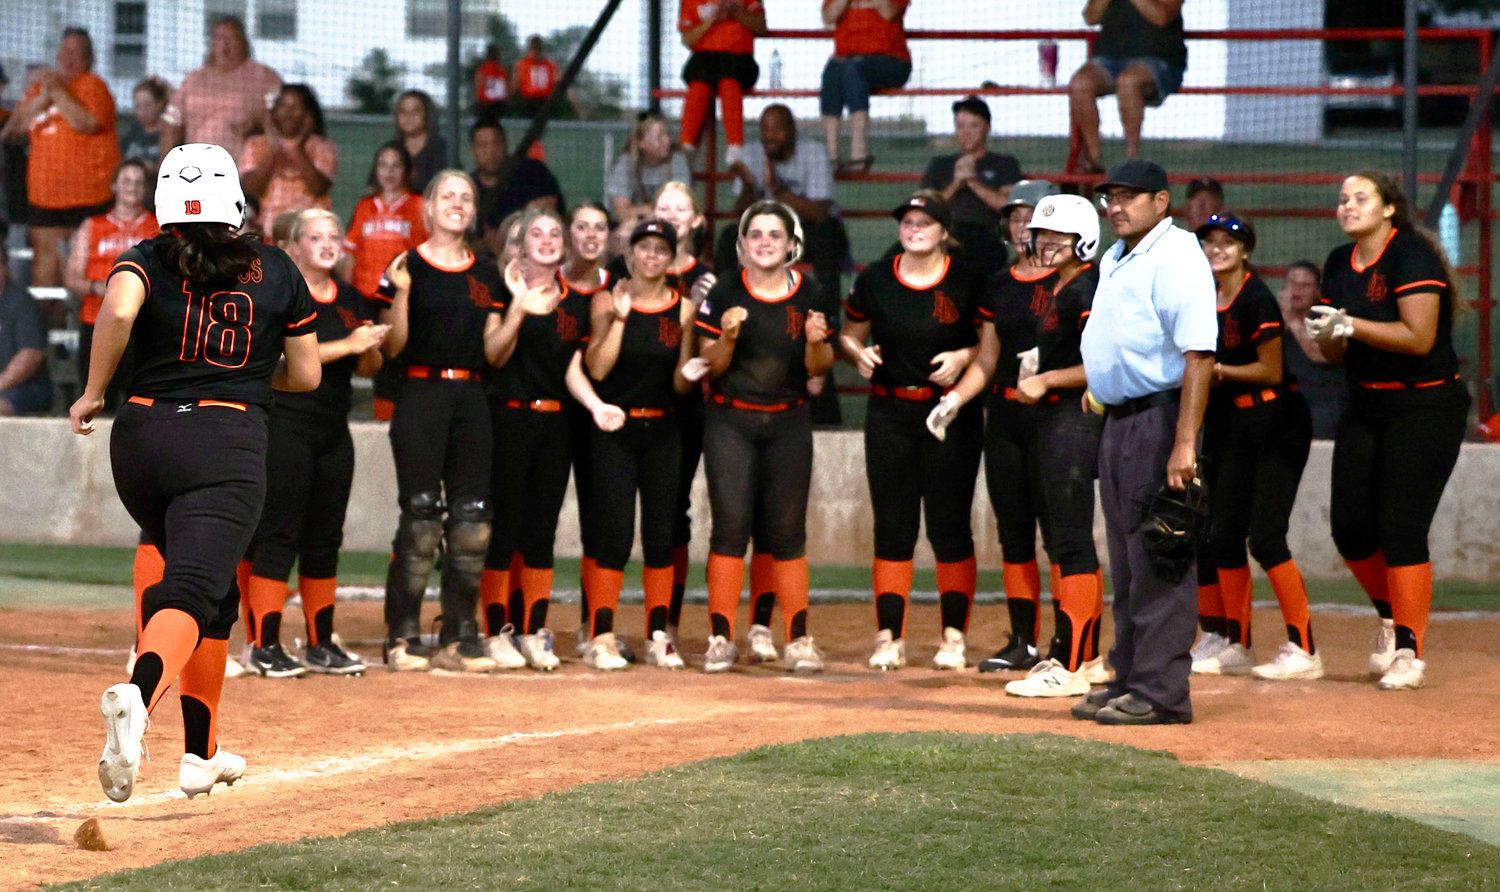 The Lexington Bulldogs wait for Cora Vasquez to cross home plate after she hit a three-run homer in the seventh inning against Purcell. The Bulldogs defeated the Dragons 8-6.